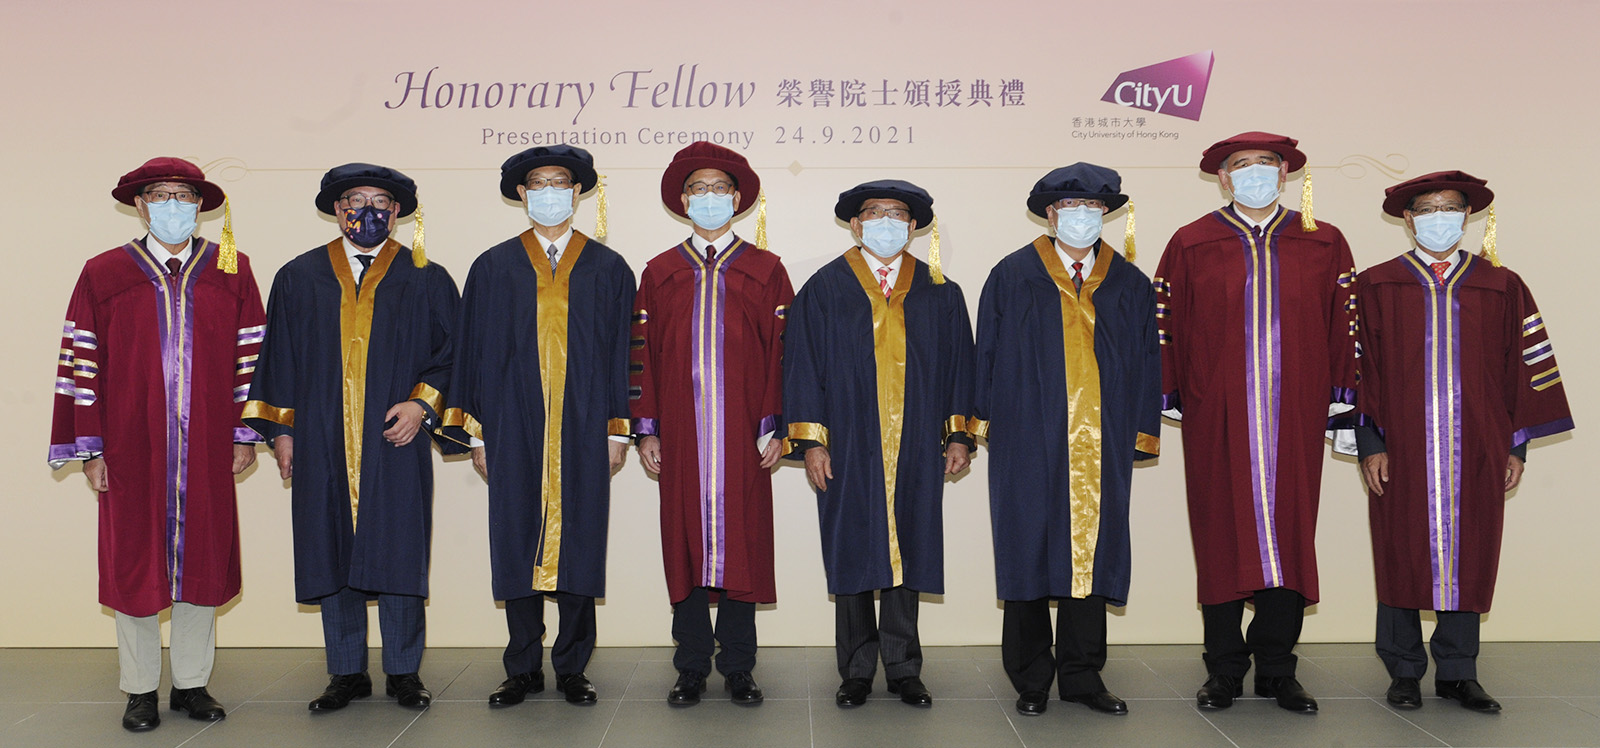 (From left) President Way Kuo, Dr Allen Shi Lop-tak, Mr Wong Ming-yam, Dr Chung Shui-ming, Mr Johnny Yeung Chi-hung, Professor Albert Ip Yuk-keung, Mr Lester Garson Huang, Mr Charles Chin Ying-on.